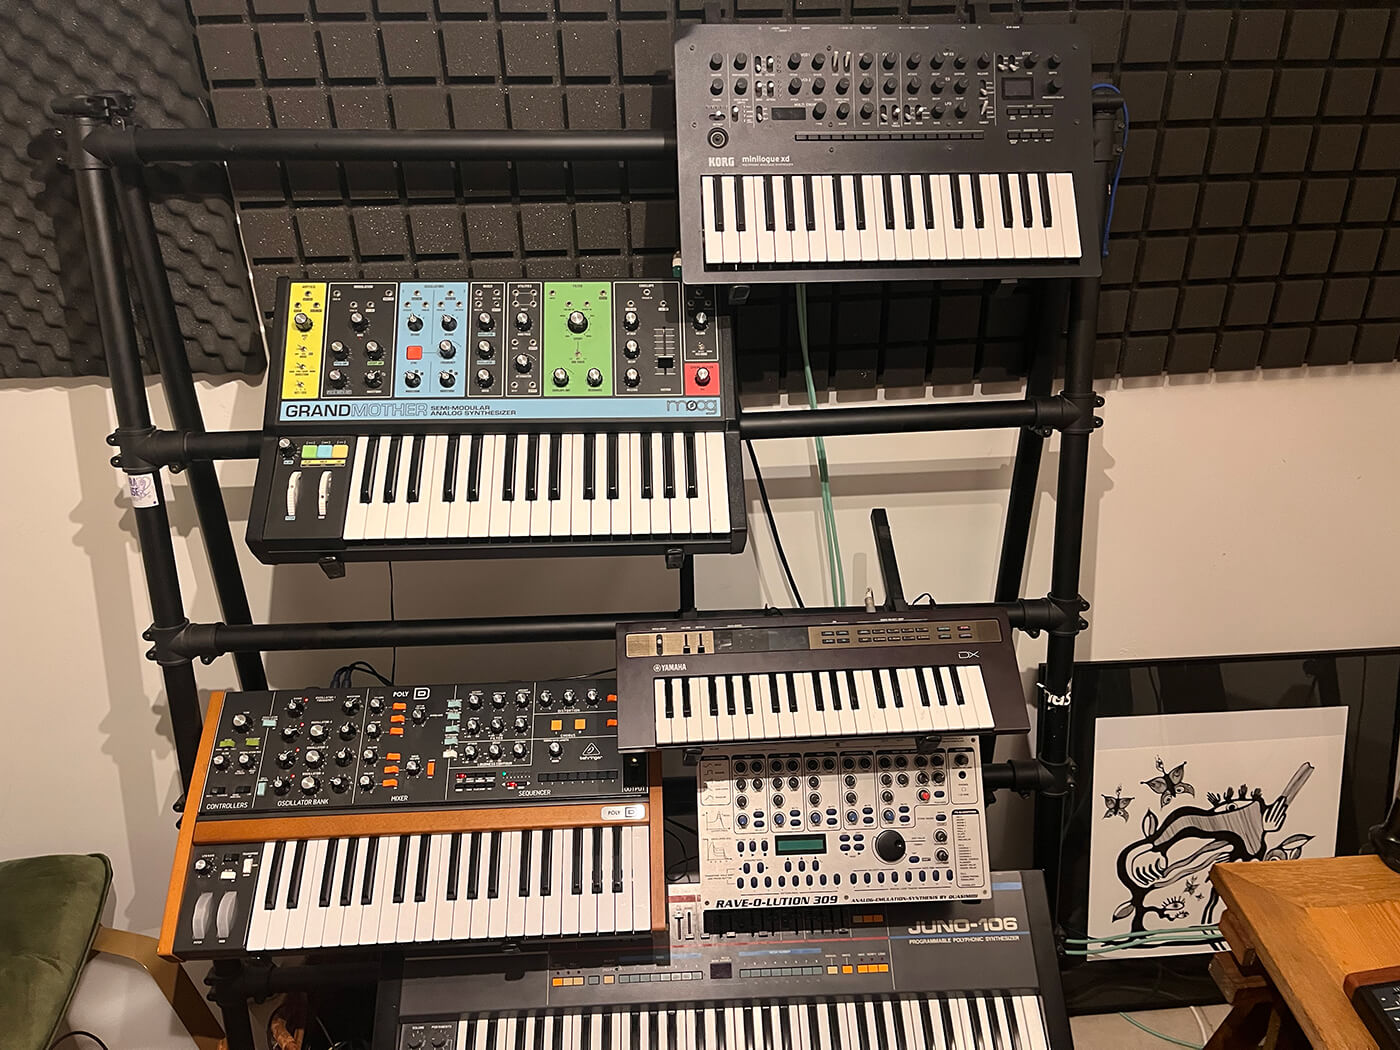 Maison Blanche’s synth rack in his studio